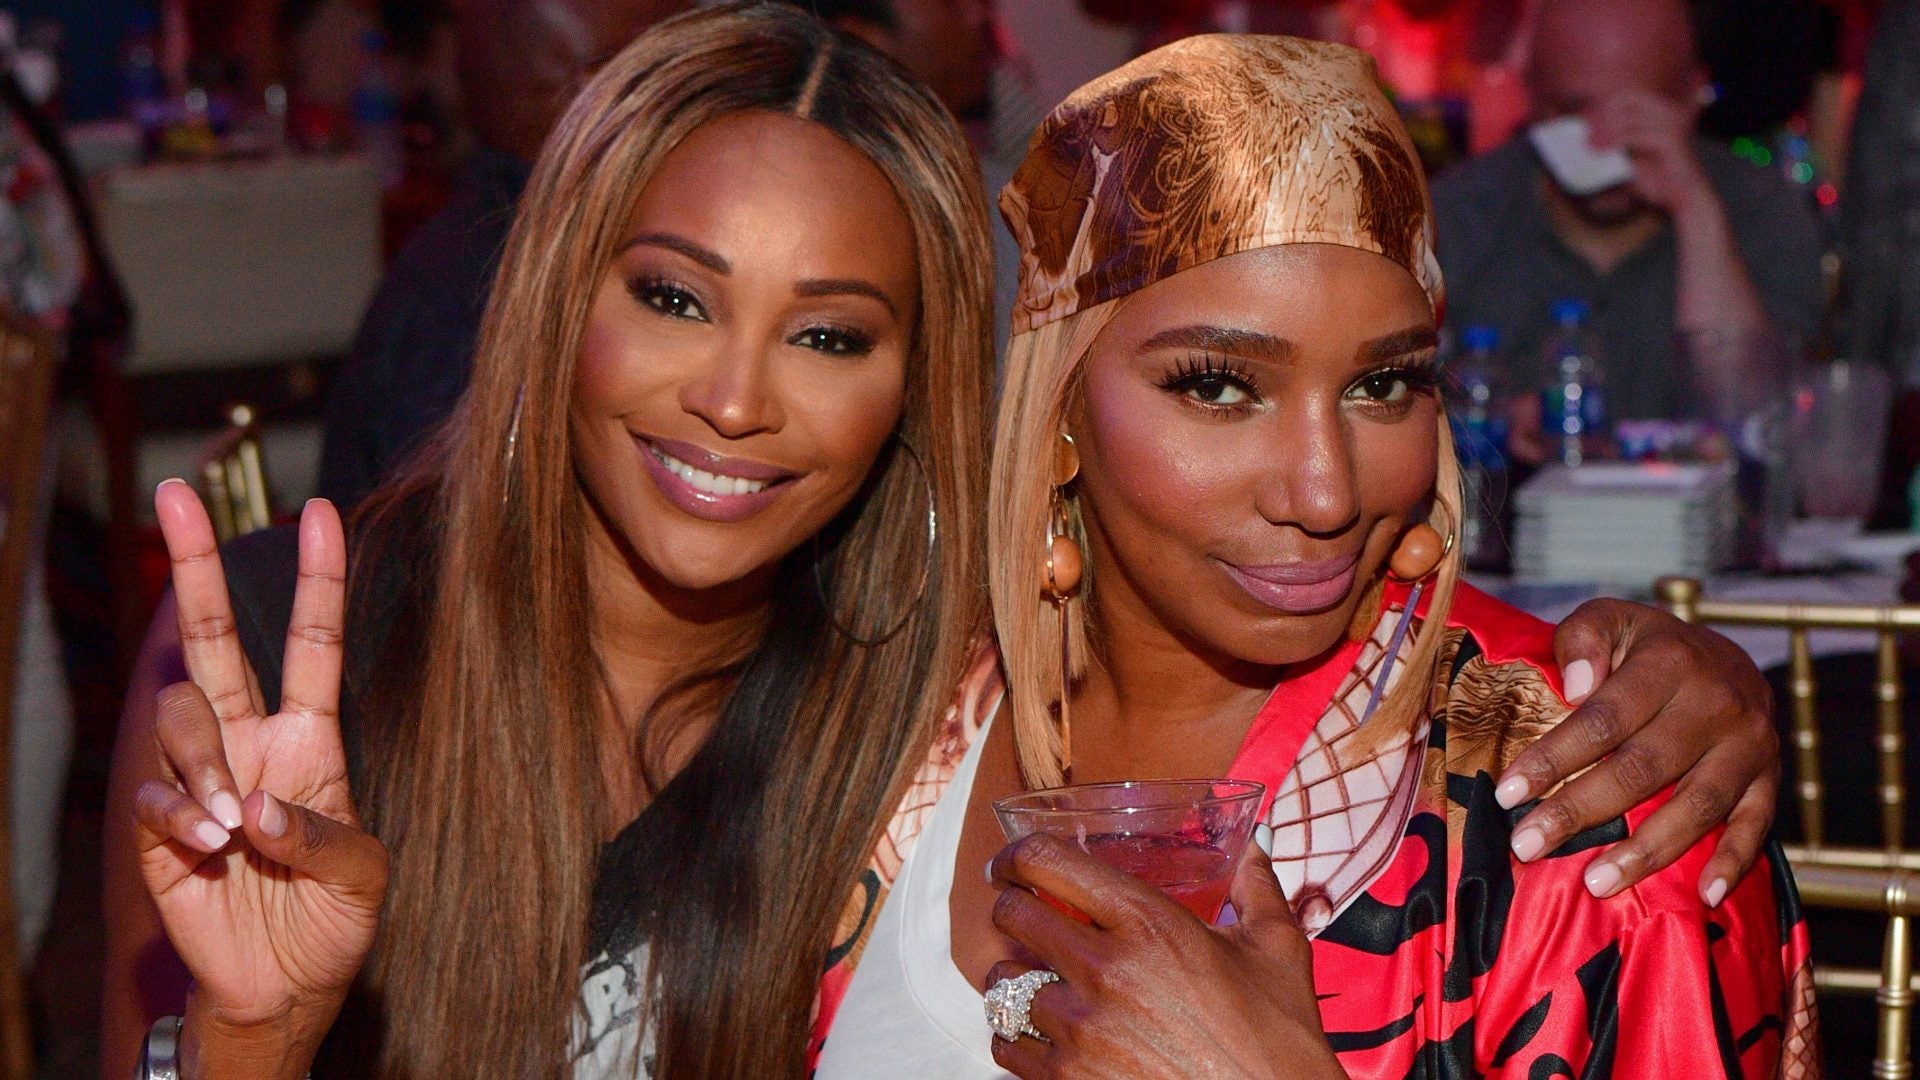 12 Photos That Make Us Miss Nene Leakes And Cynthia Bailey's Friendship